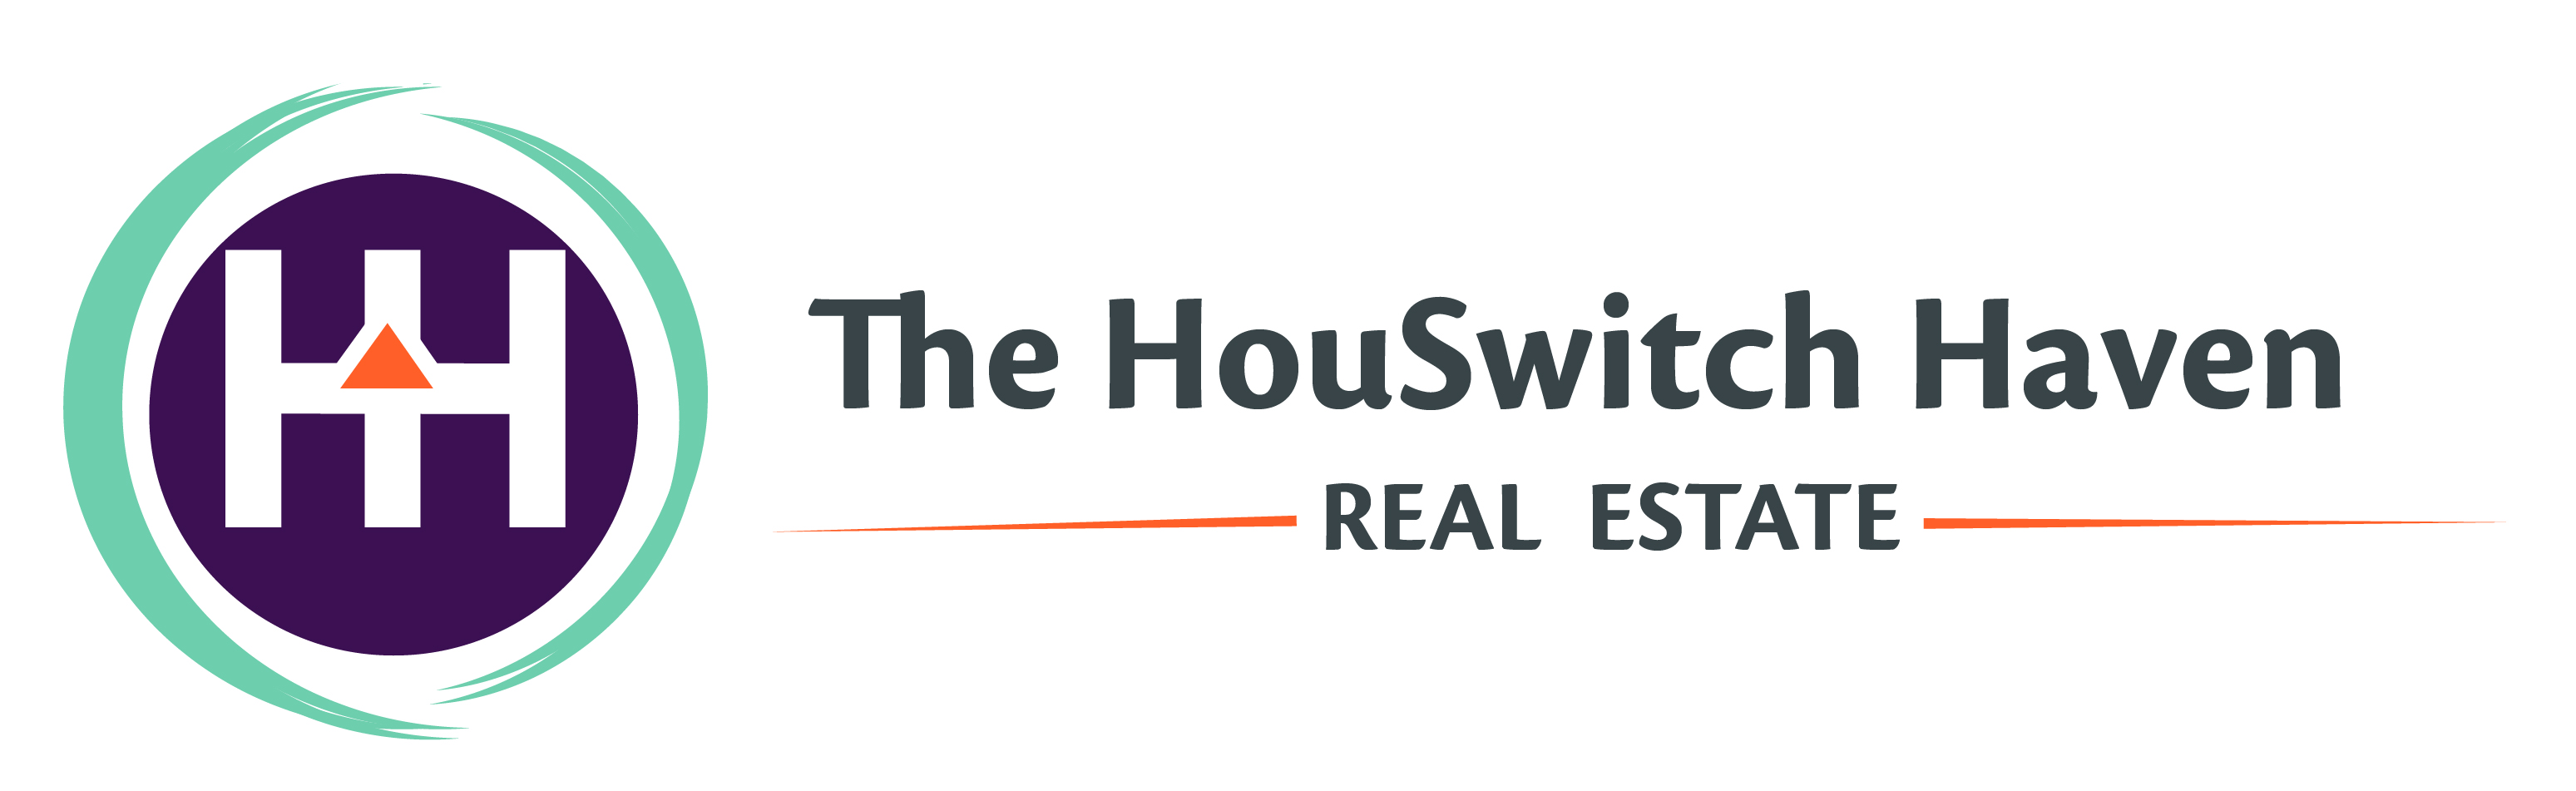 The HouSwitch Haven